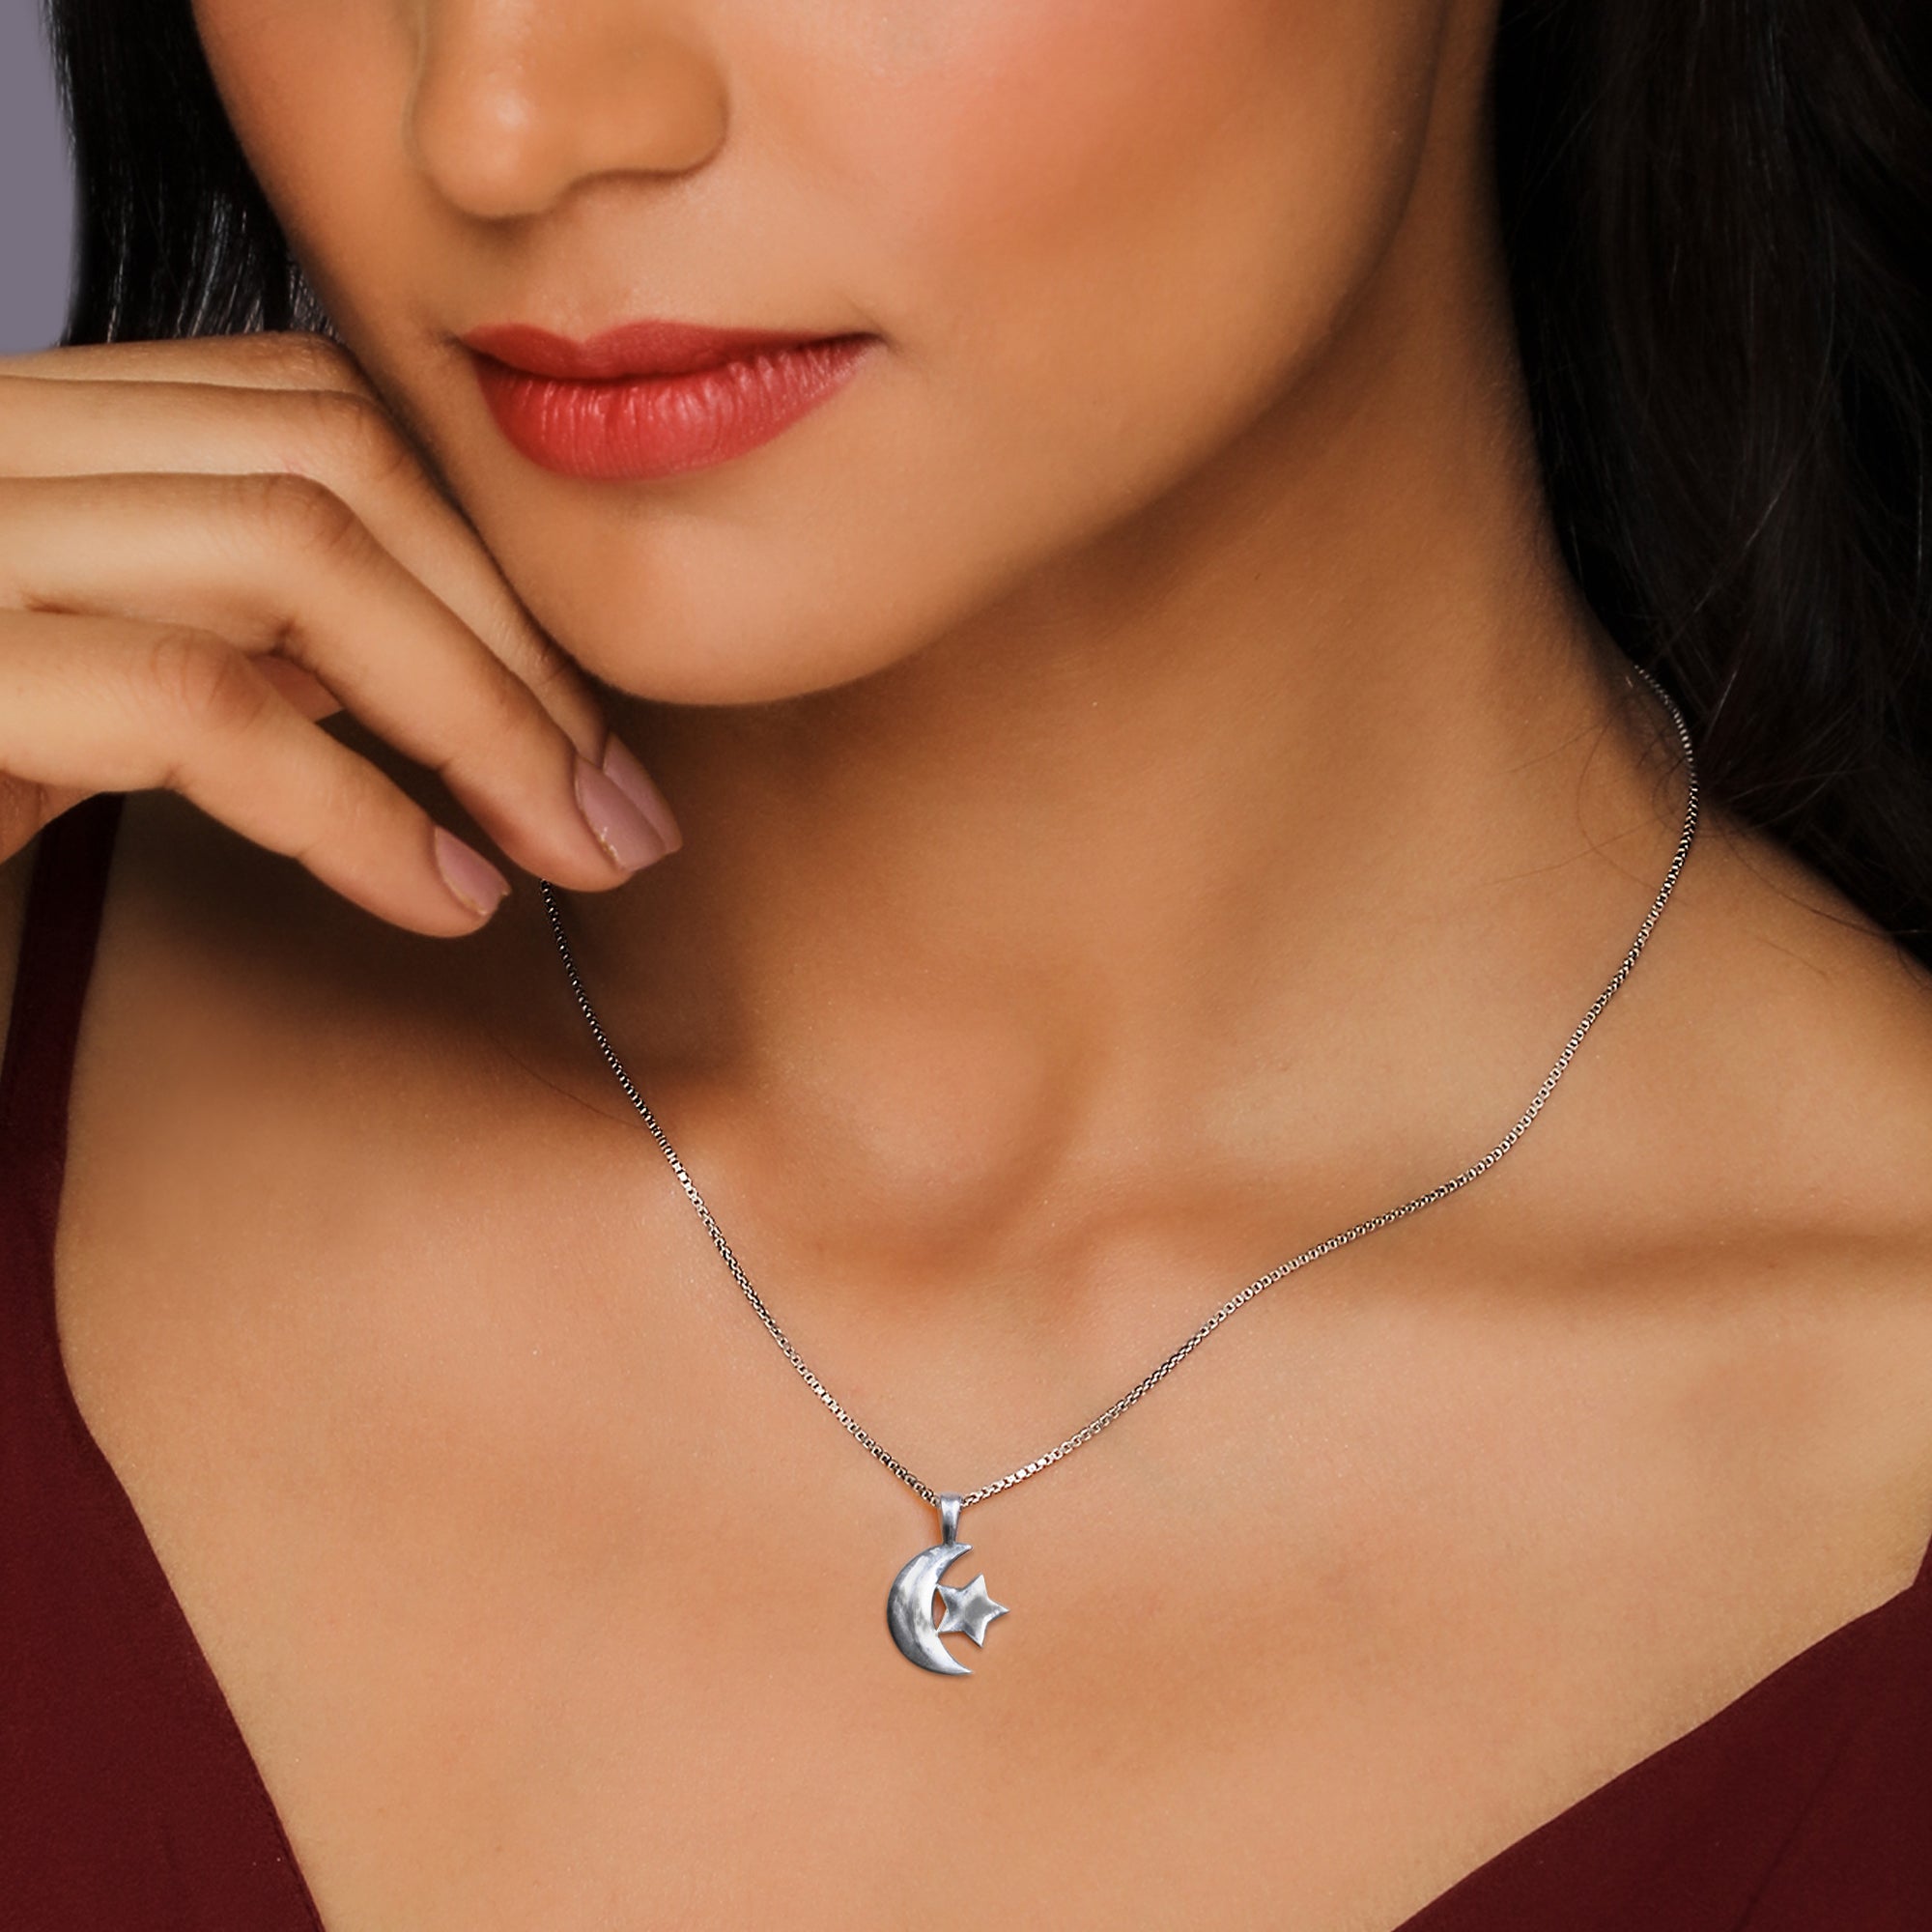 Glowing Moonstone Necklace – Space Mesmerise